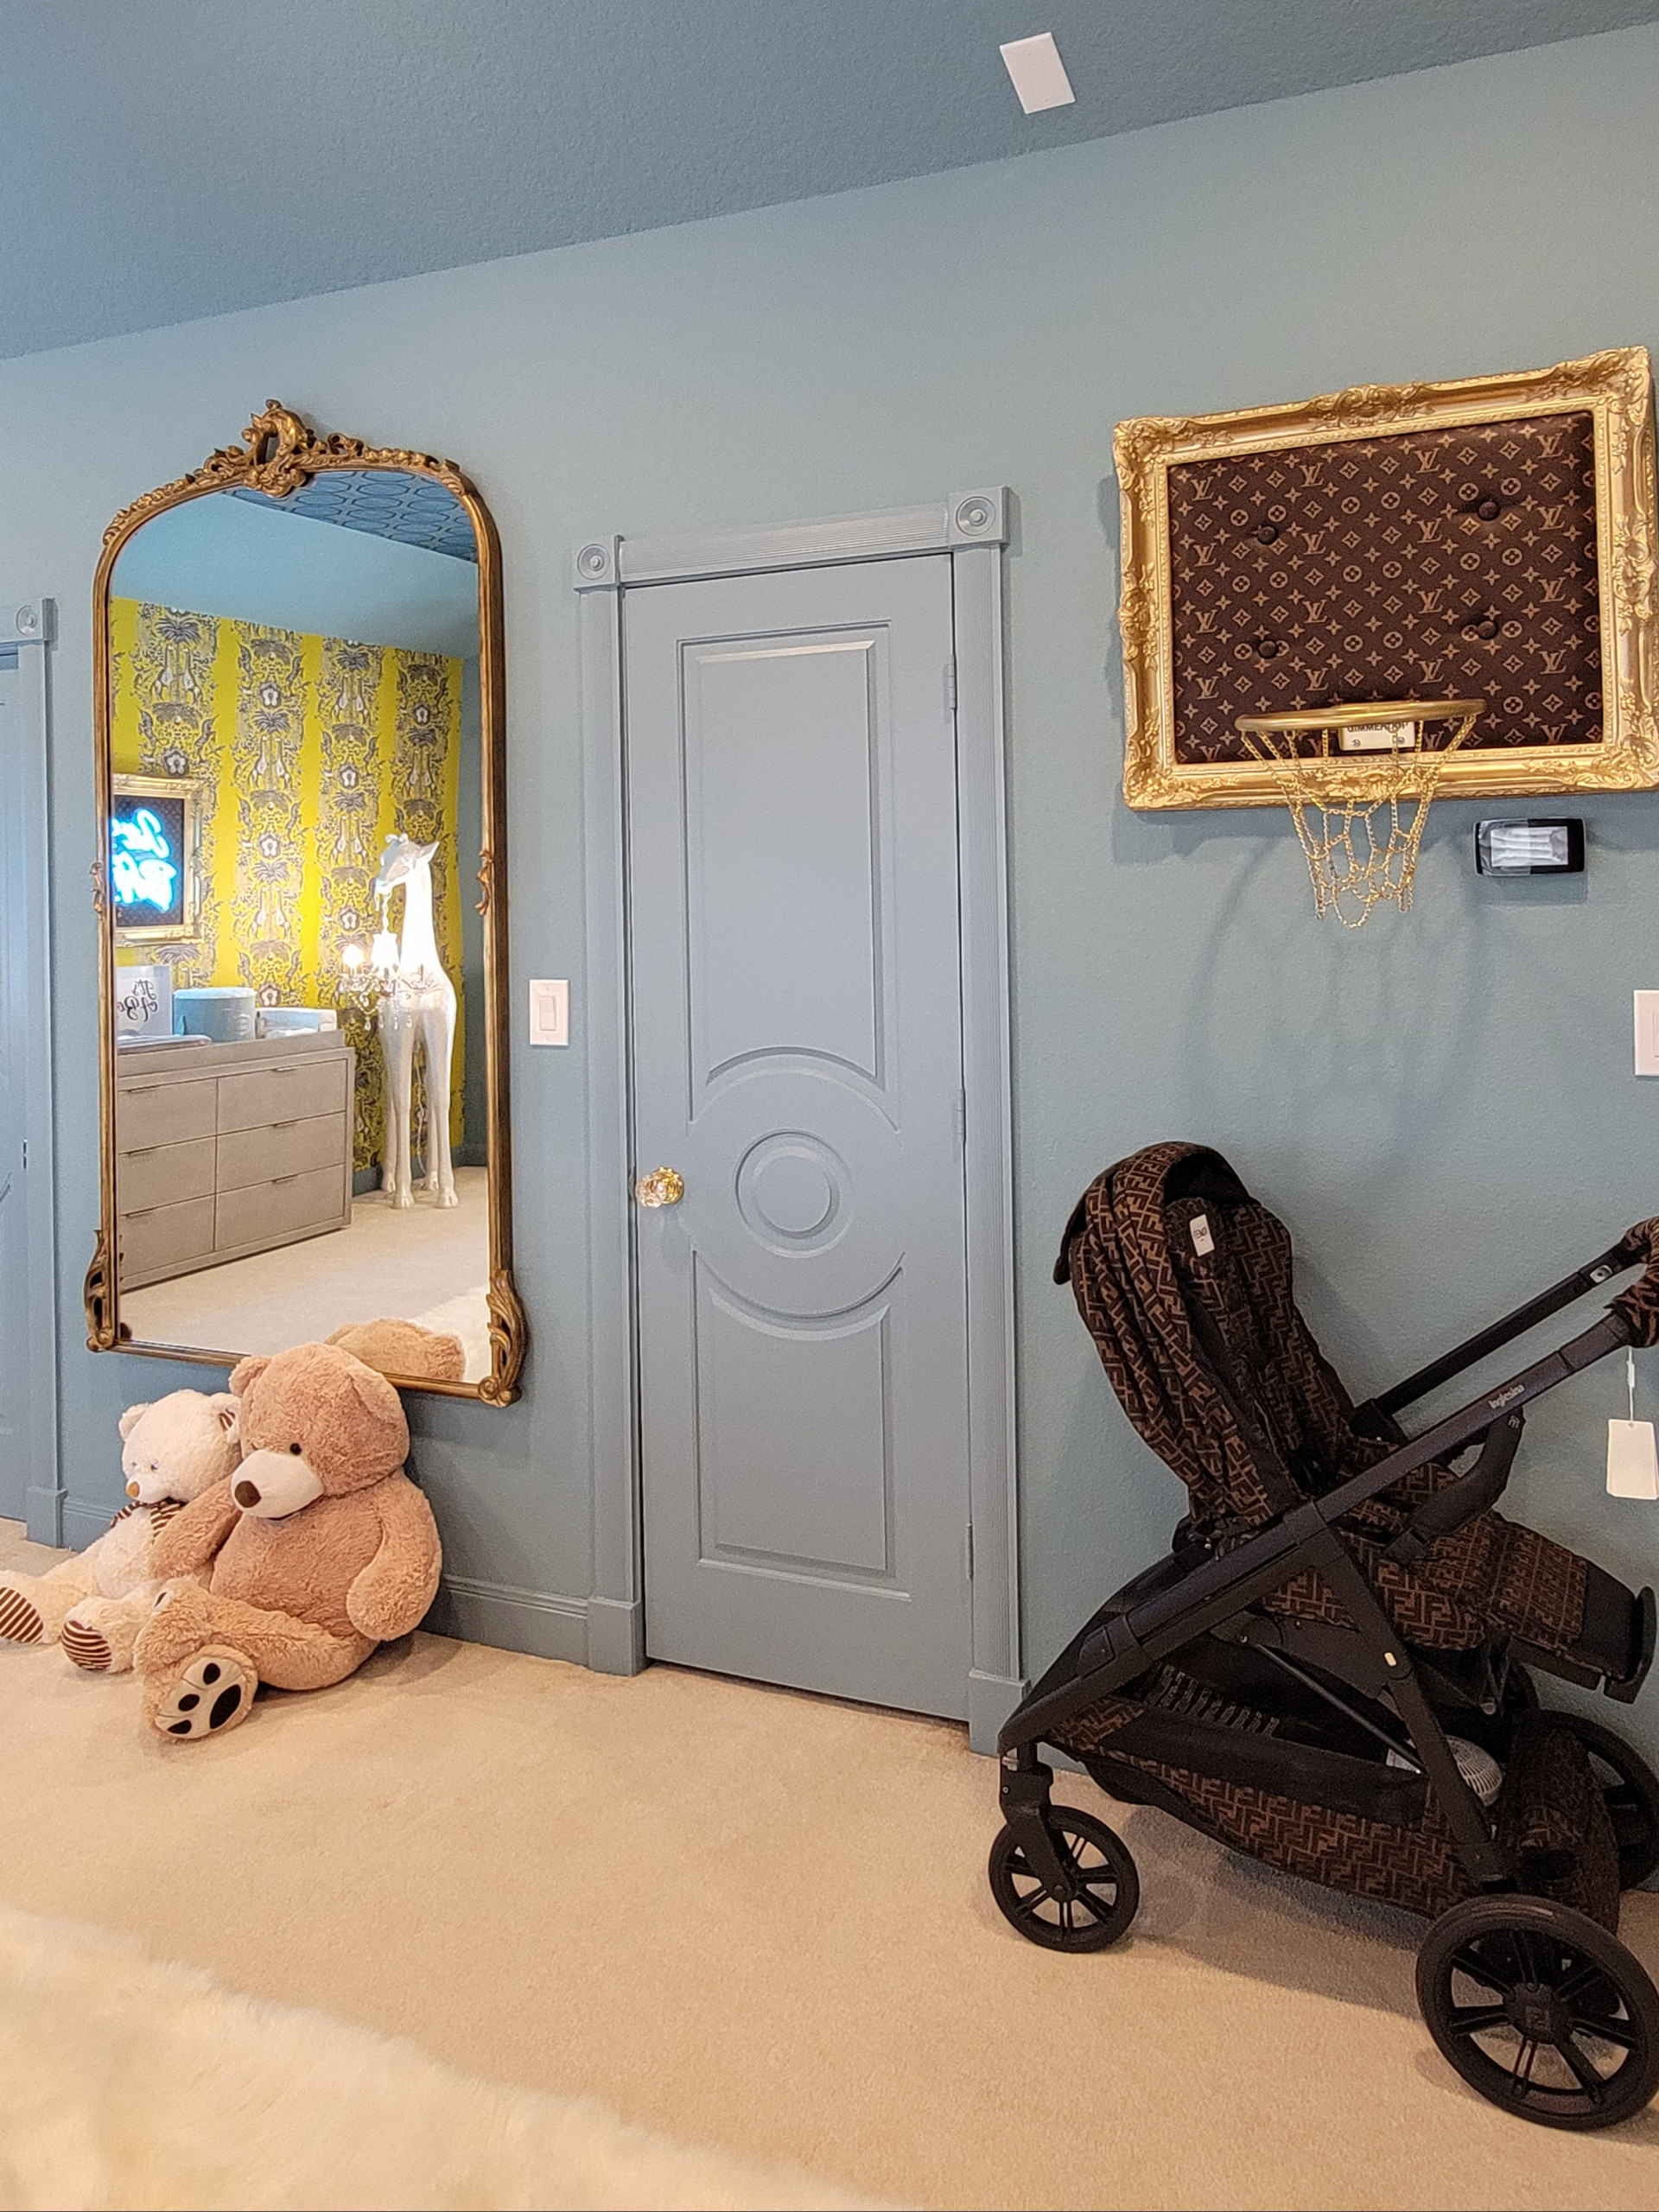 Ray Shell - Couture Nursery